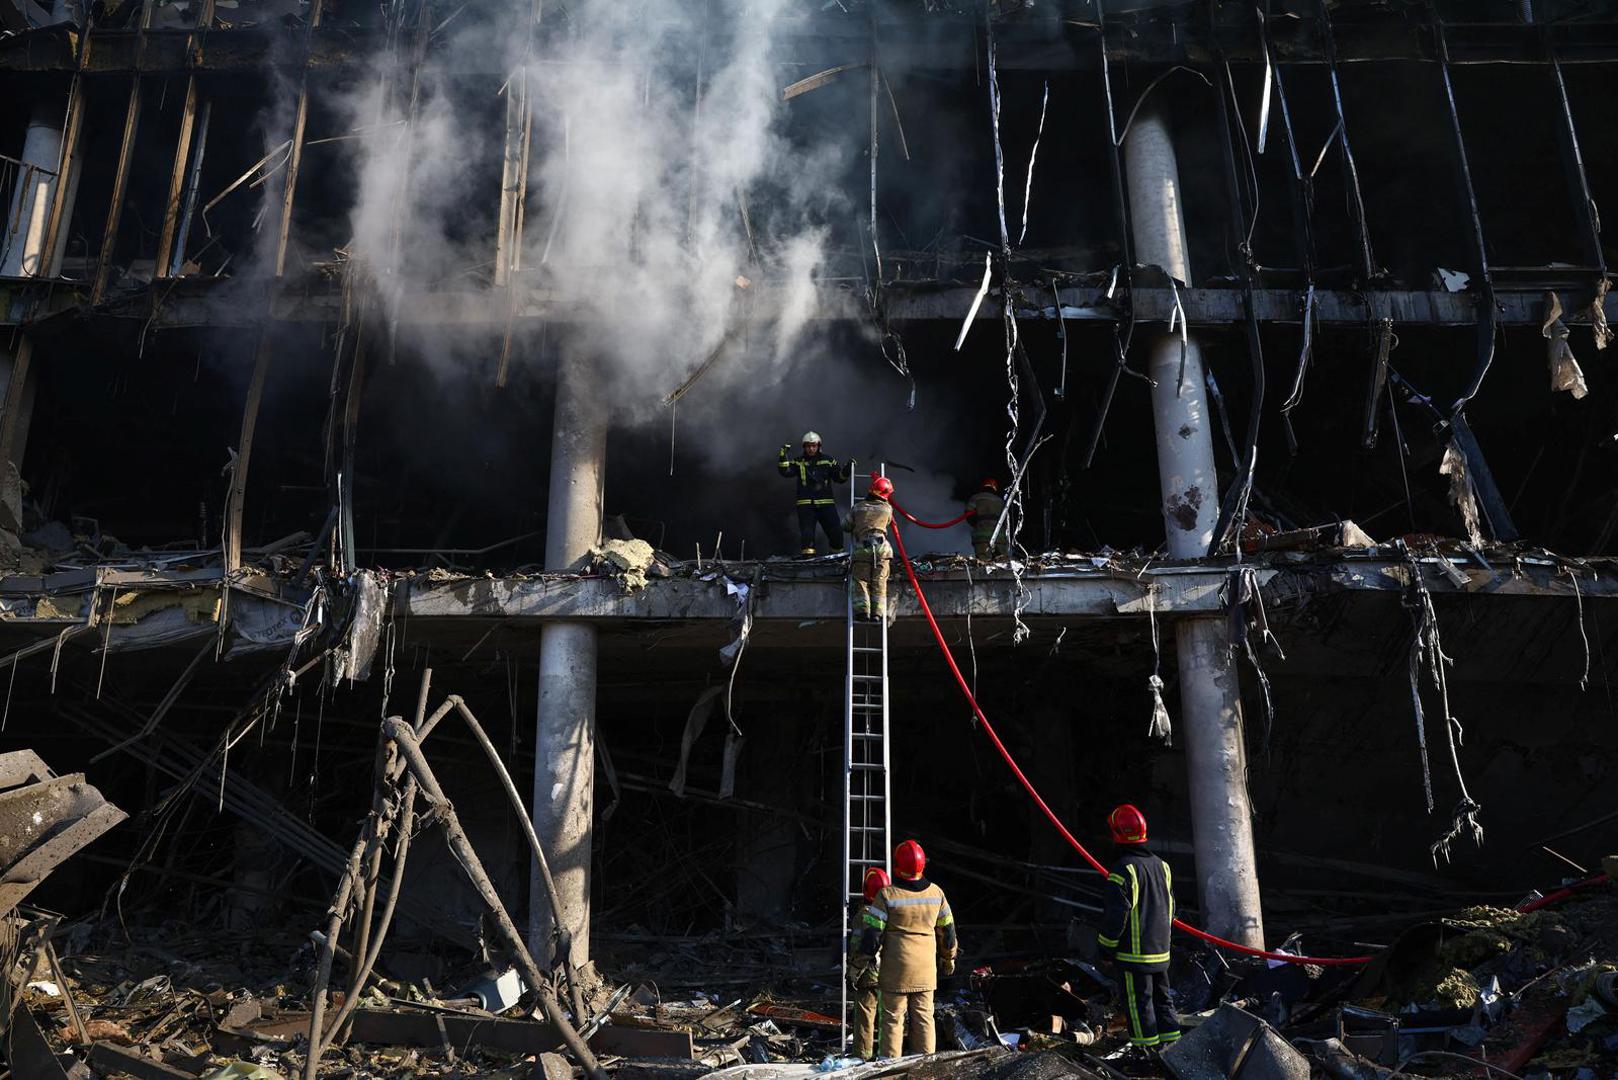 Firefighters work at the site of a bombing at a shopping center as Russia's invasion of Ukraine continues, in Kyiv, Ukraine March 21, 2022. REUTERS/Marko Djurica Photo: MARKO DJURICA/REUTERS